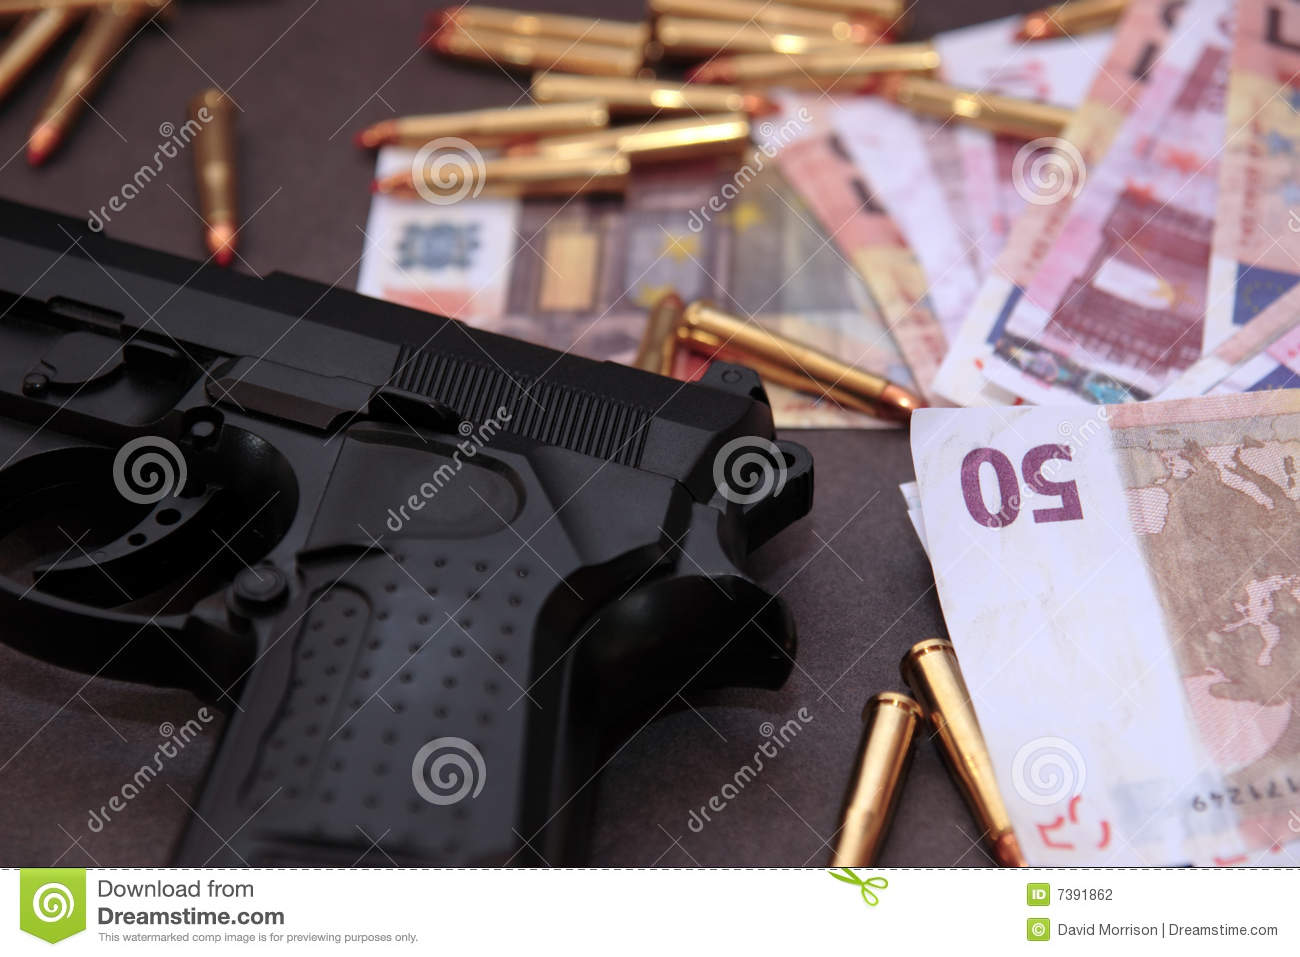 Stash Of Drugs Gun And Money Showing A Dangerous Cost To Life